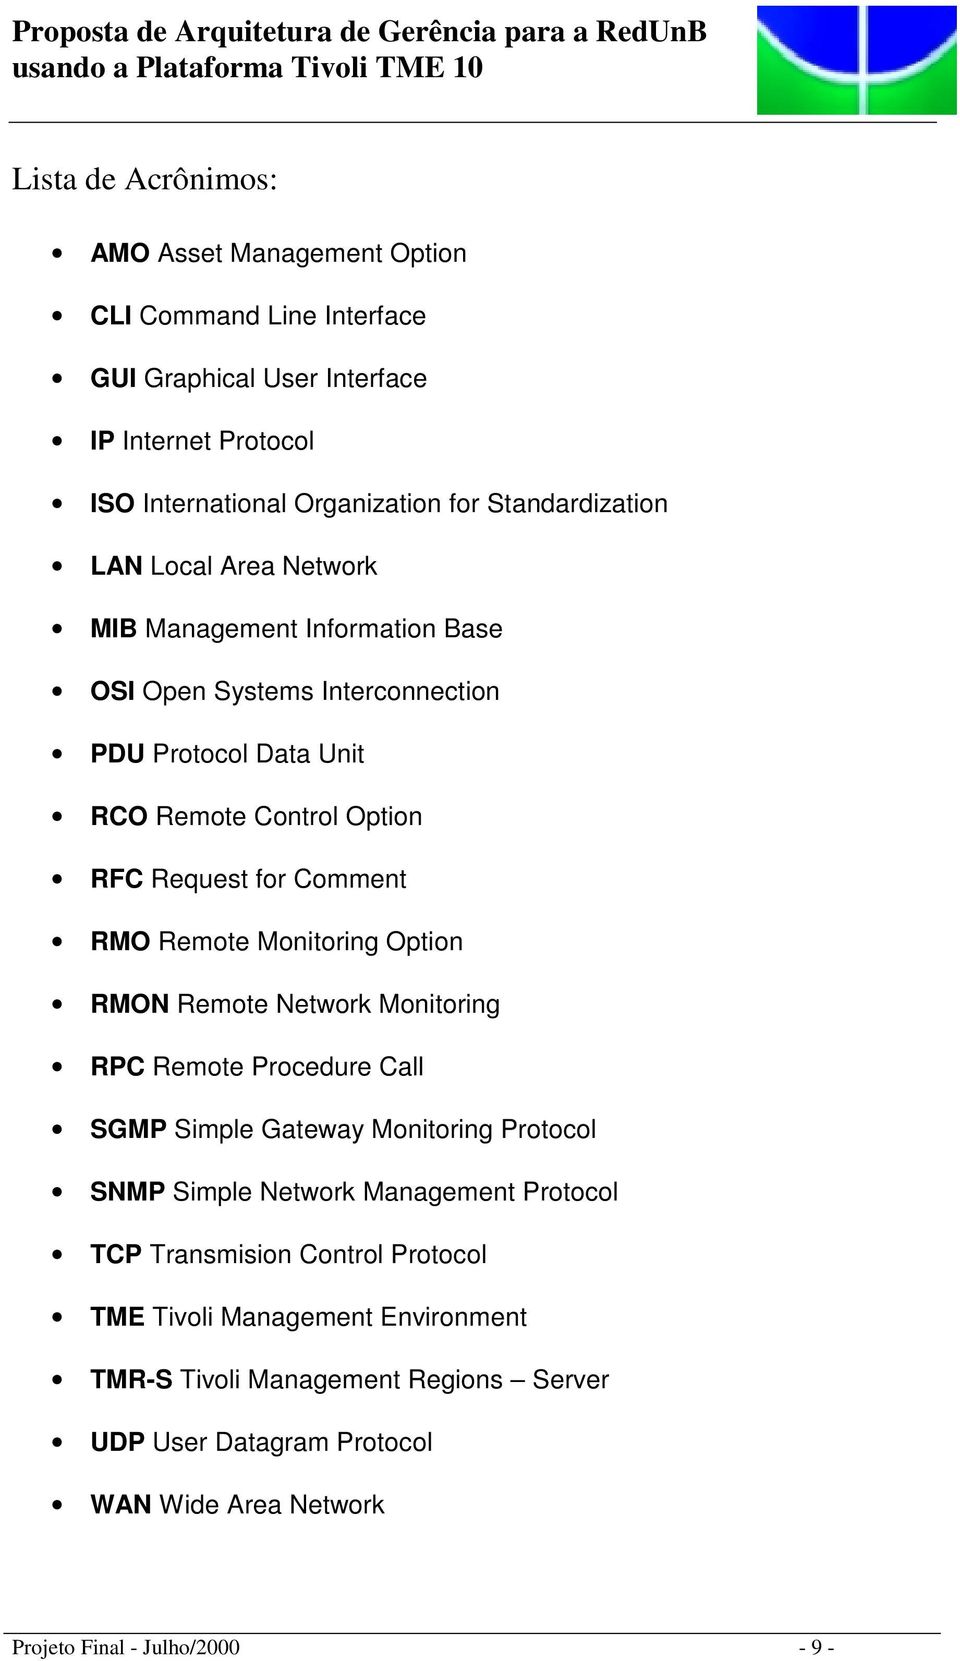 Comment RMO Remote Monitoring Option RMON Remote Network Monitoring RPC Remote Procedure Call SGMP Simple Gateway Monitoring Protocol SNMP Simple Network Management